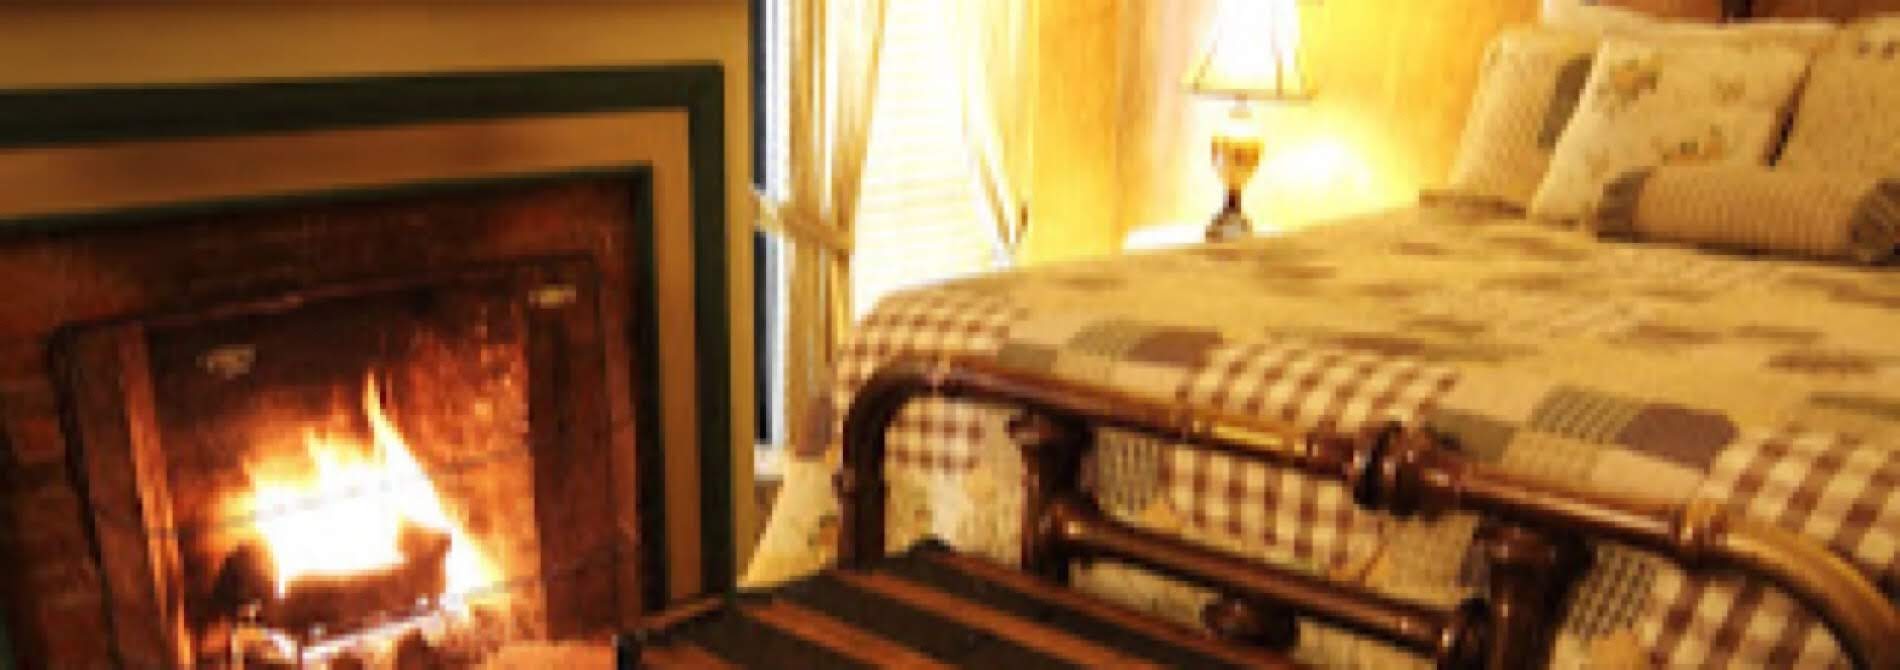 plaid bedspread on brass bed with lit fireplace